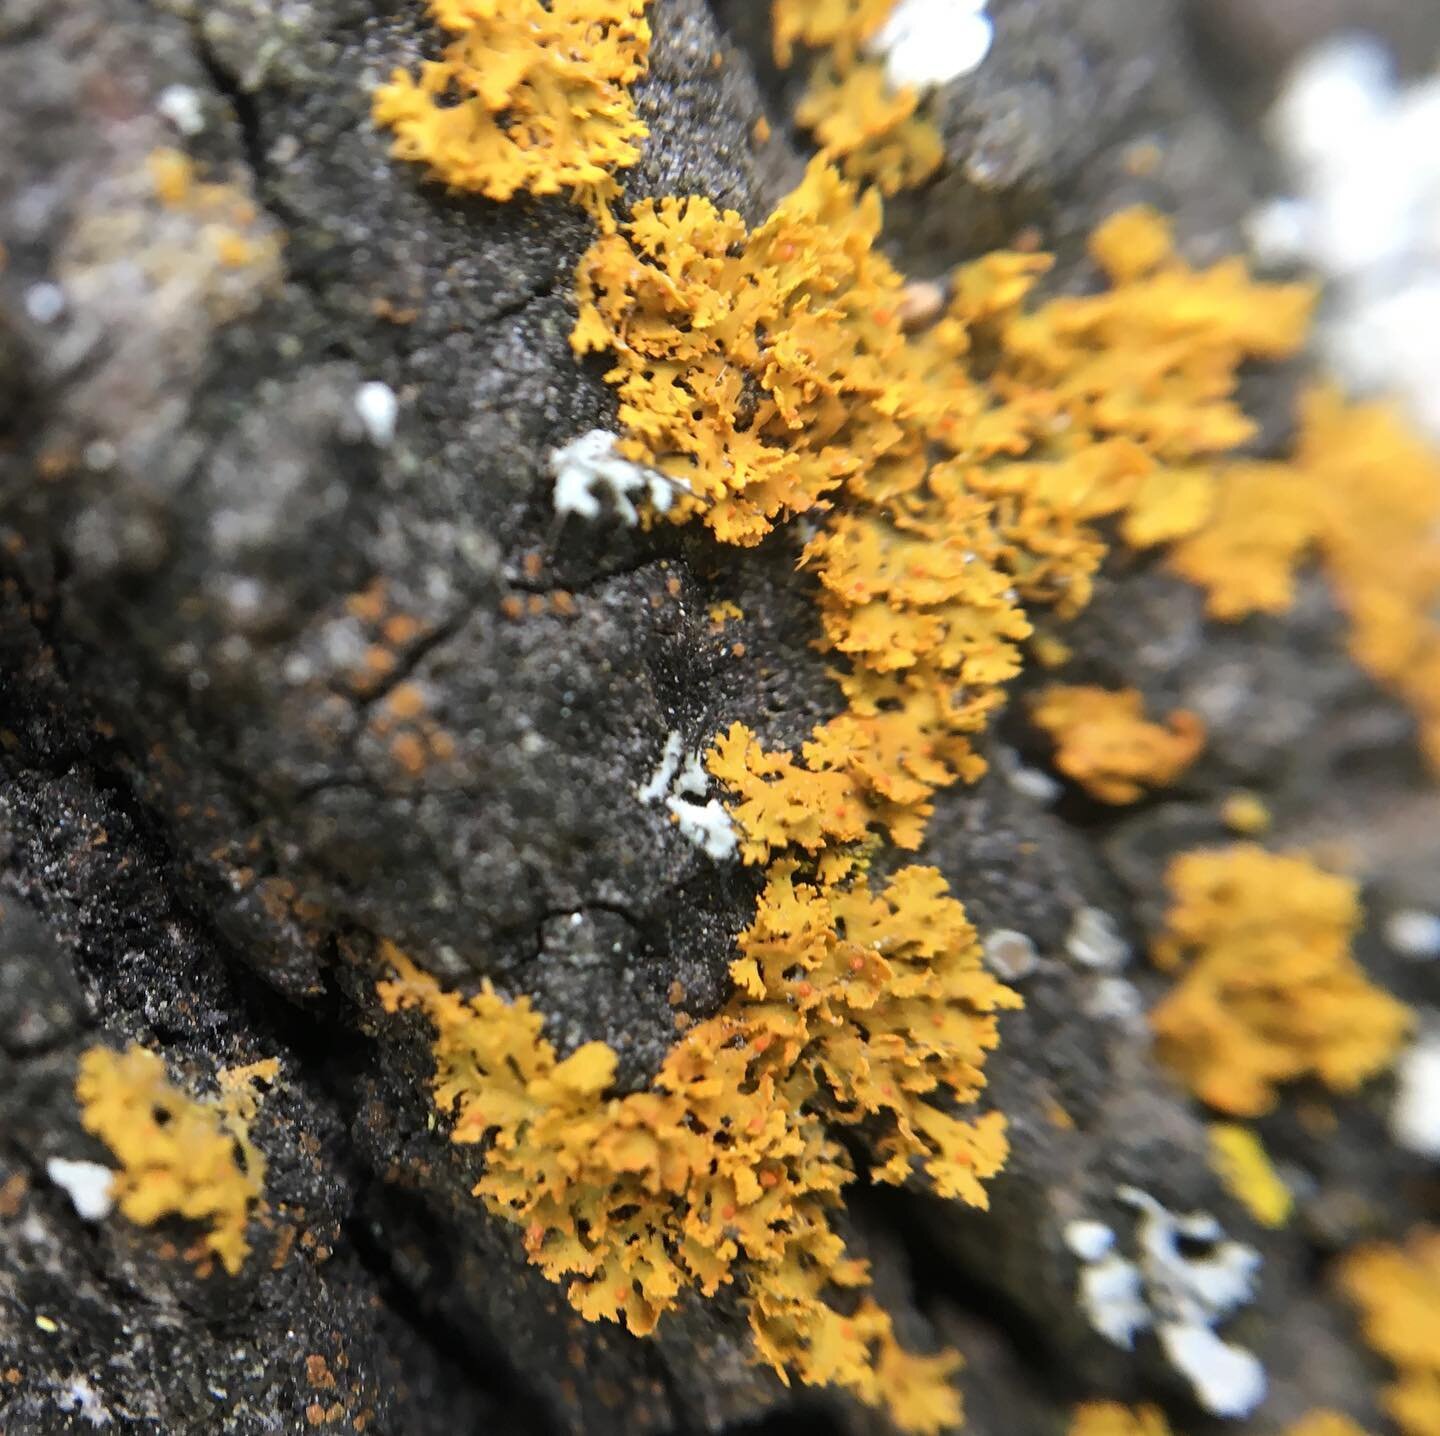 Sorry for the lack of updates, folks. Haven&rsquo;t been feeling very creative lately. Here&rsquo;s some #lichen I captured recently with my #macro lens. I love the warmth and intensity of this color! #ochre #yellow #golden #fungi #jaylilliane #surfa